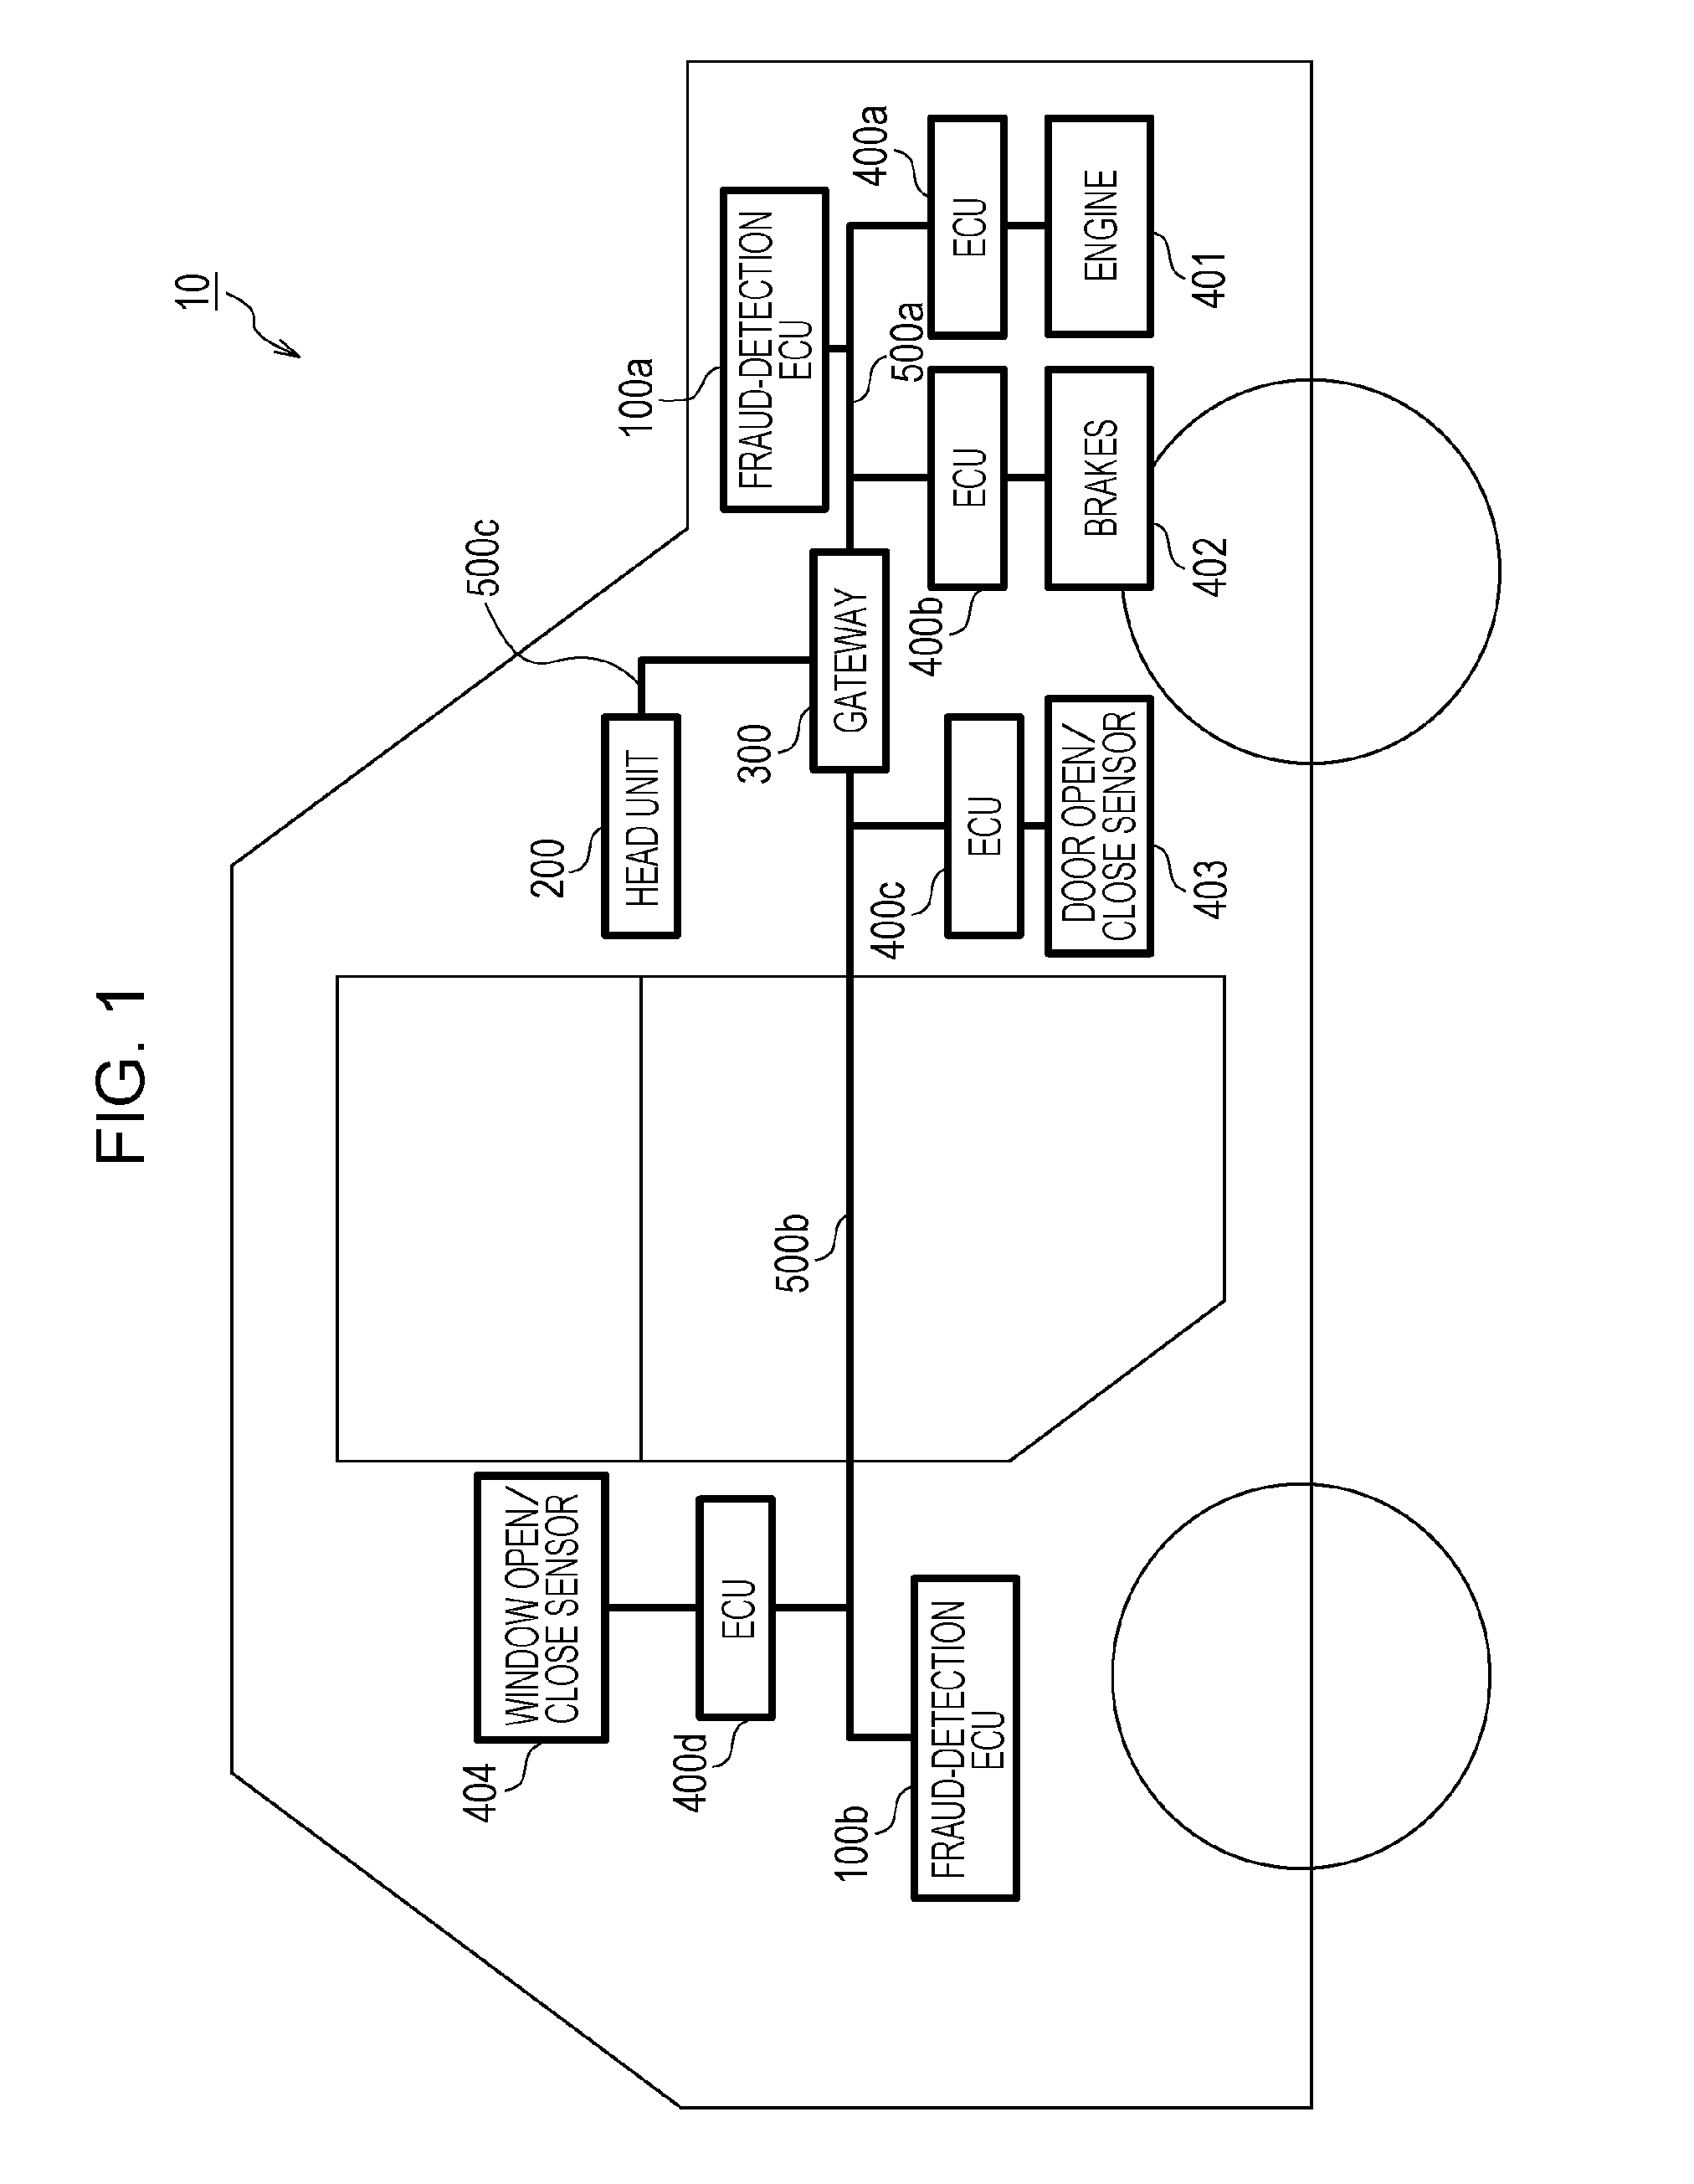 In-vehicle network system, fraud-detection electronic control unit, and fraud-detection method